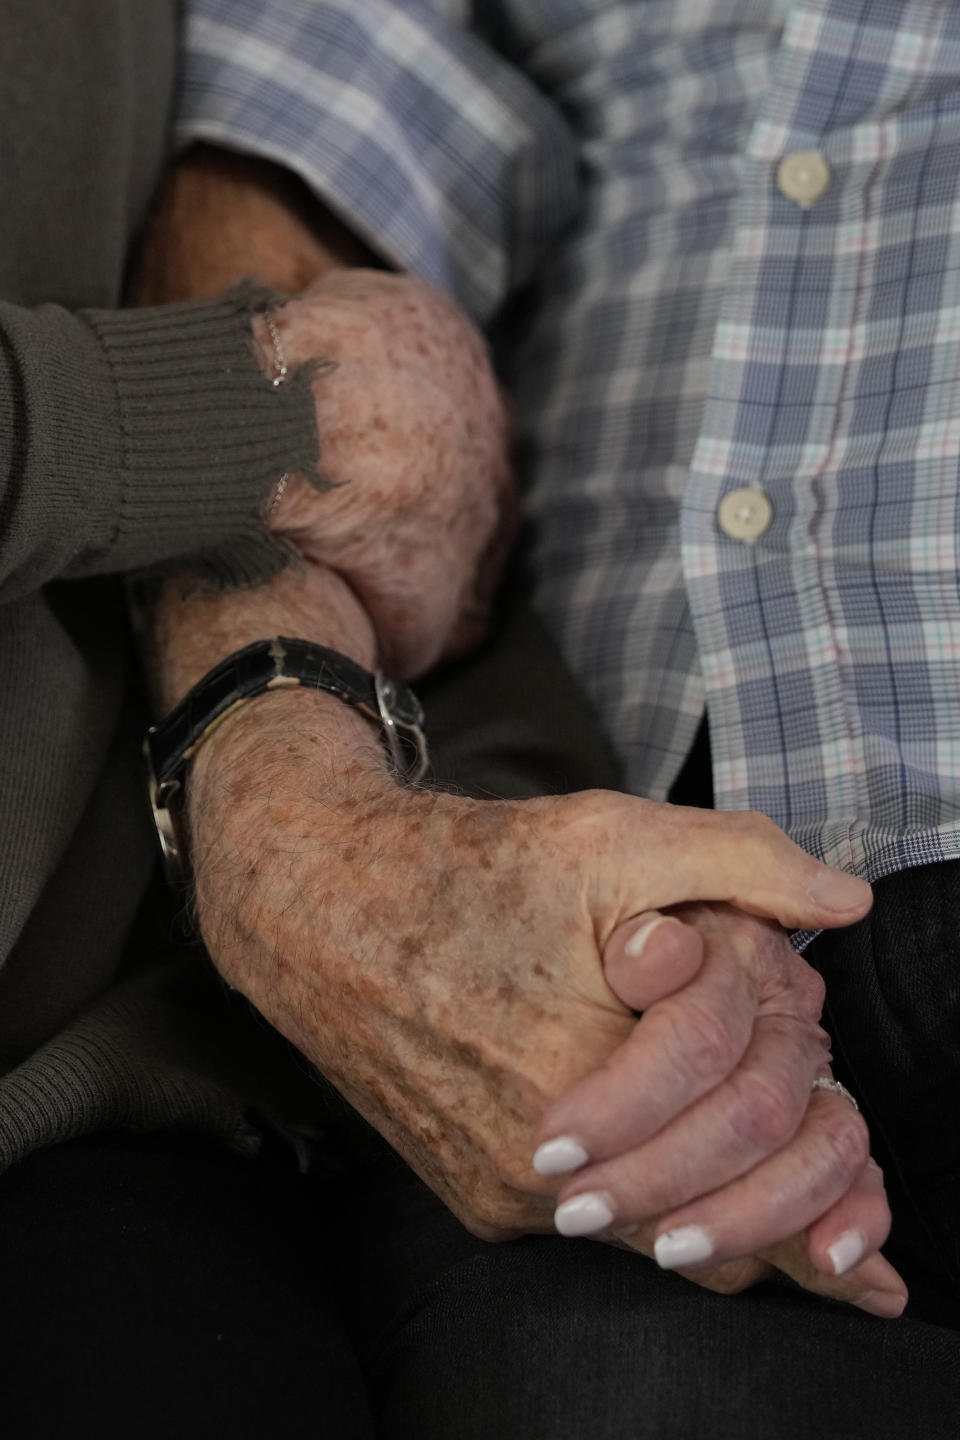 World War II veteran Harold Terens, 100, right, holds hands with Jeanne Swerlin, 96, as they speak during an interview, Thursday, Feb. 29, 2024, in Boca Raton, Fla. Terens will be honored by France as part of the country's 80th anniversary celebration of D-Day. In addition, the couple will be married on June 8 at a chapel near the beaches where U.S. forces landed. (AP Photo/Wilfredo Lee)